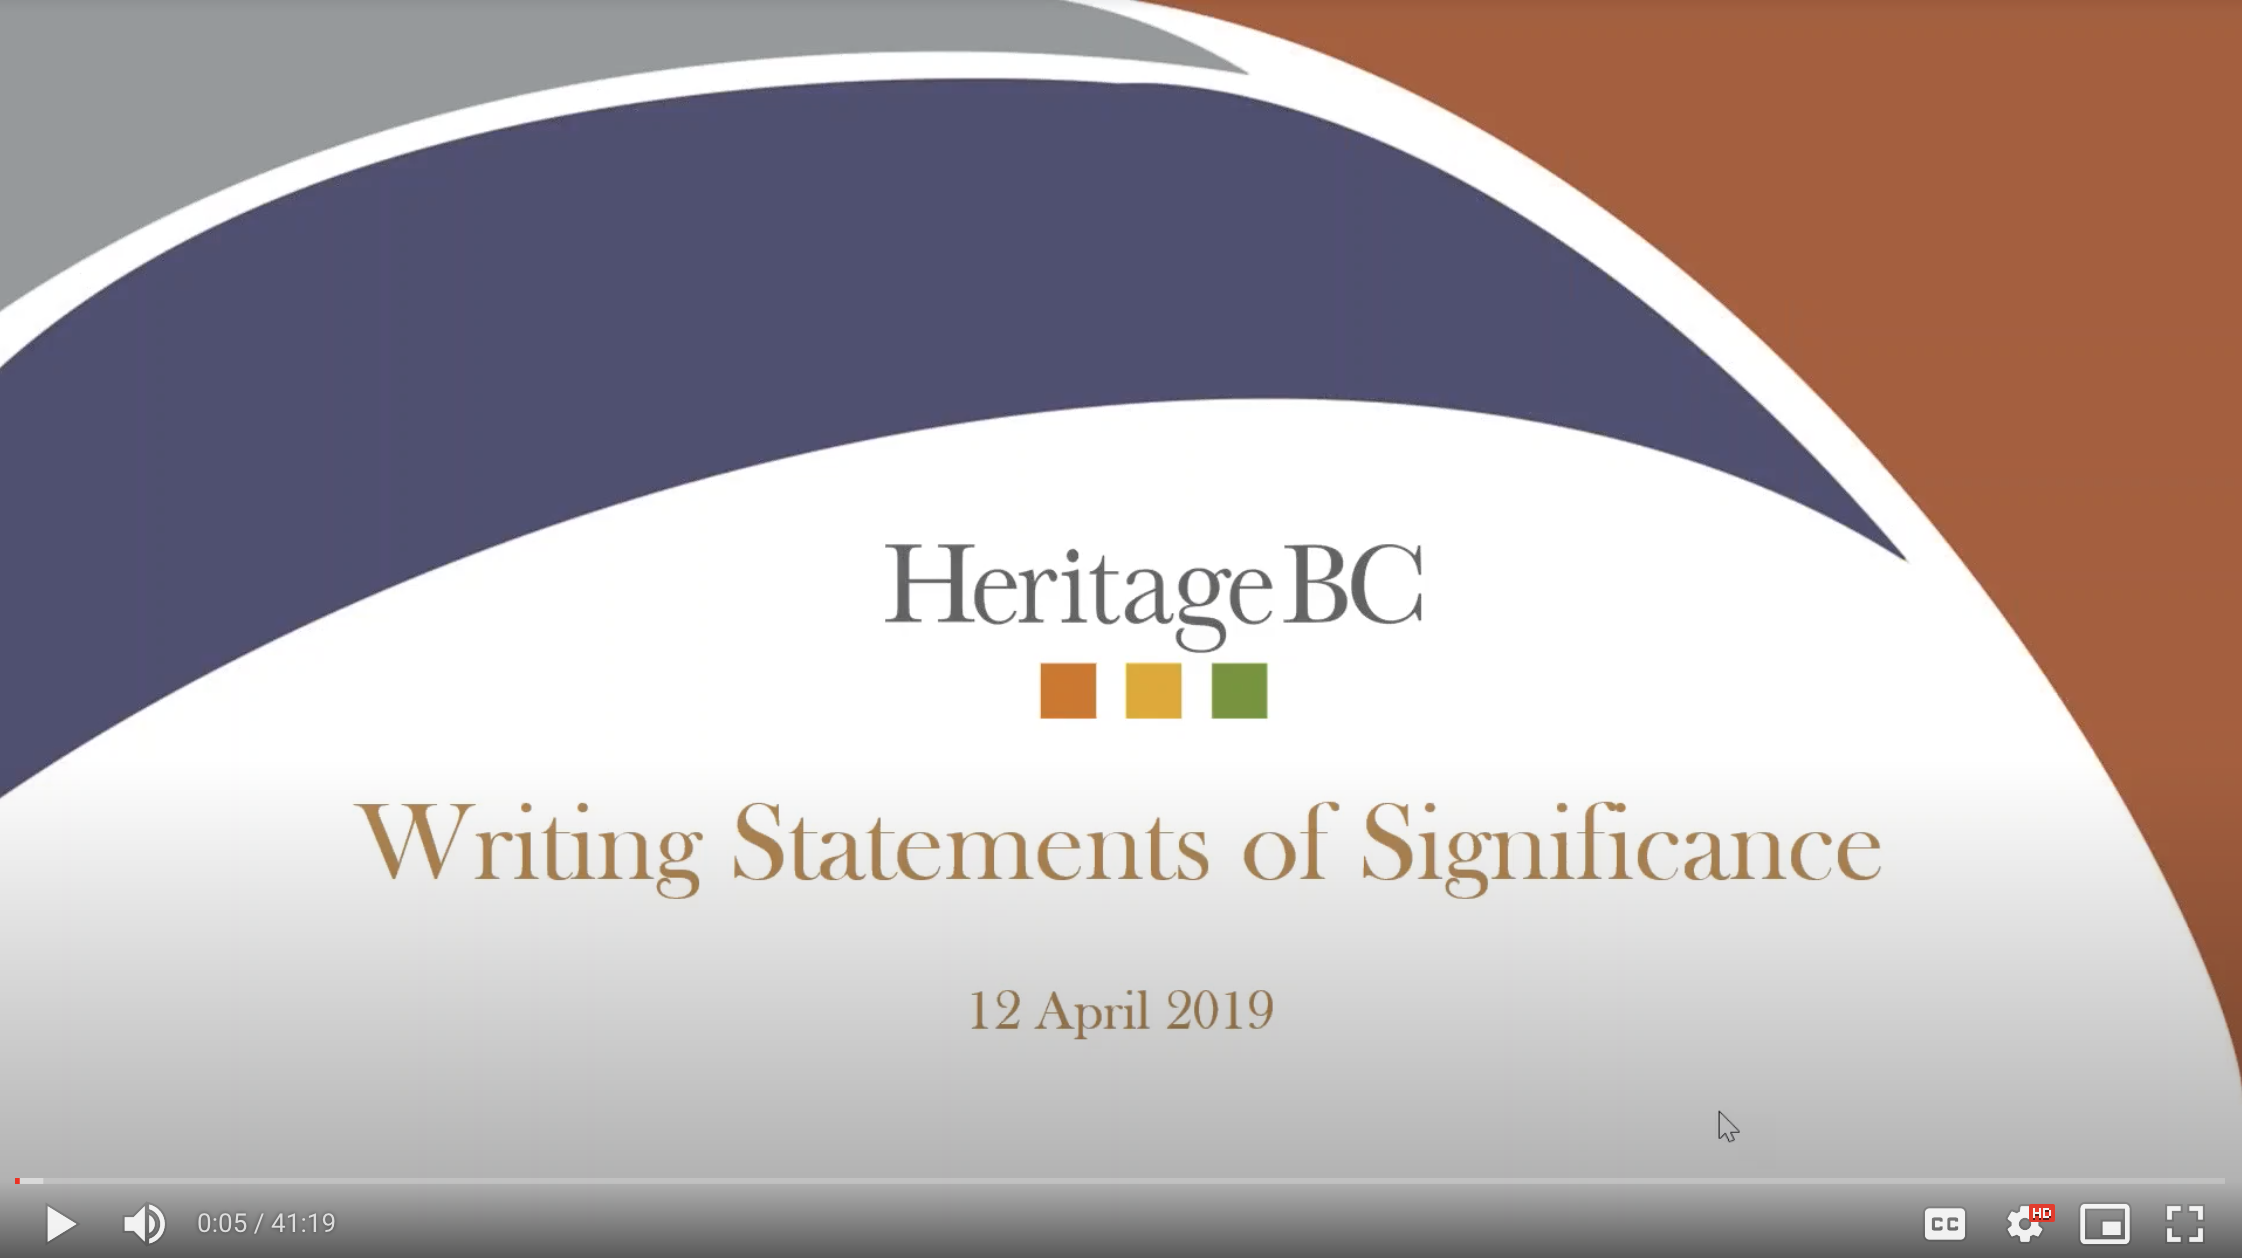 Opening Slide for webinar on writing statements of significance